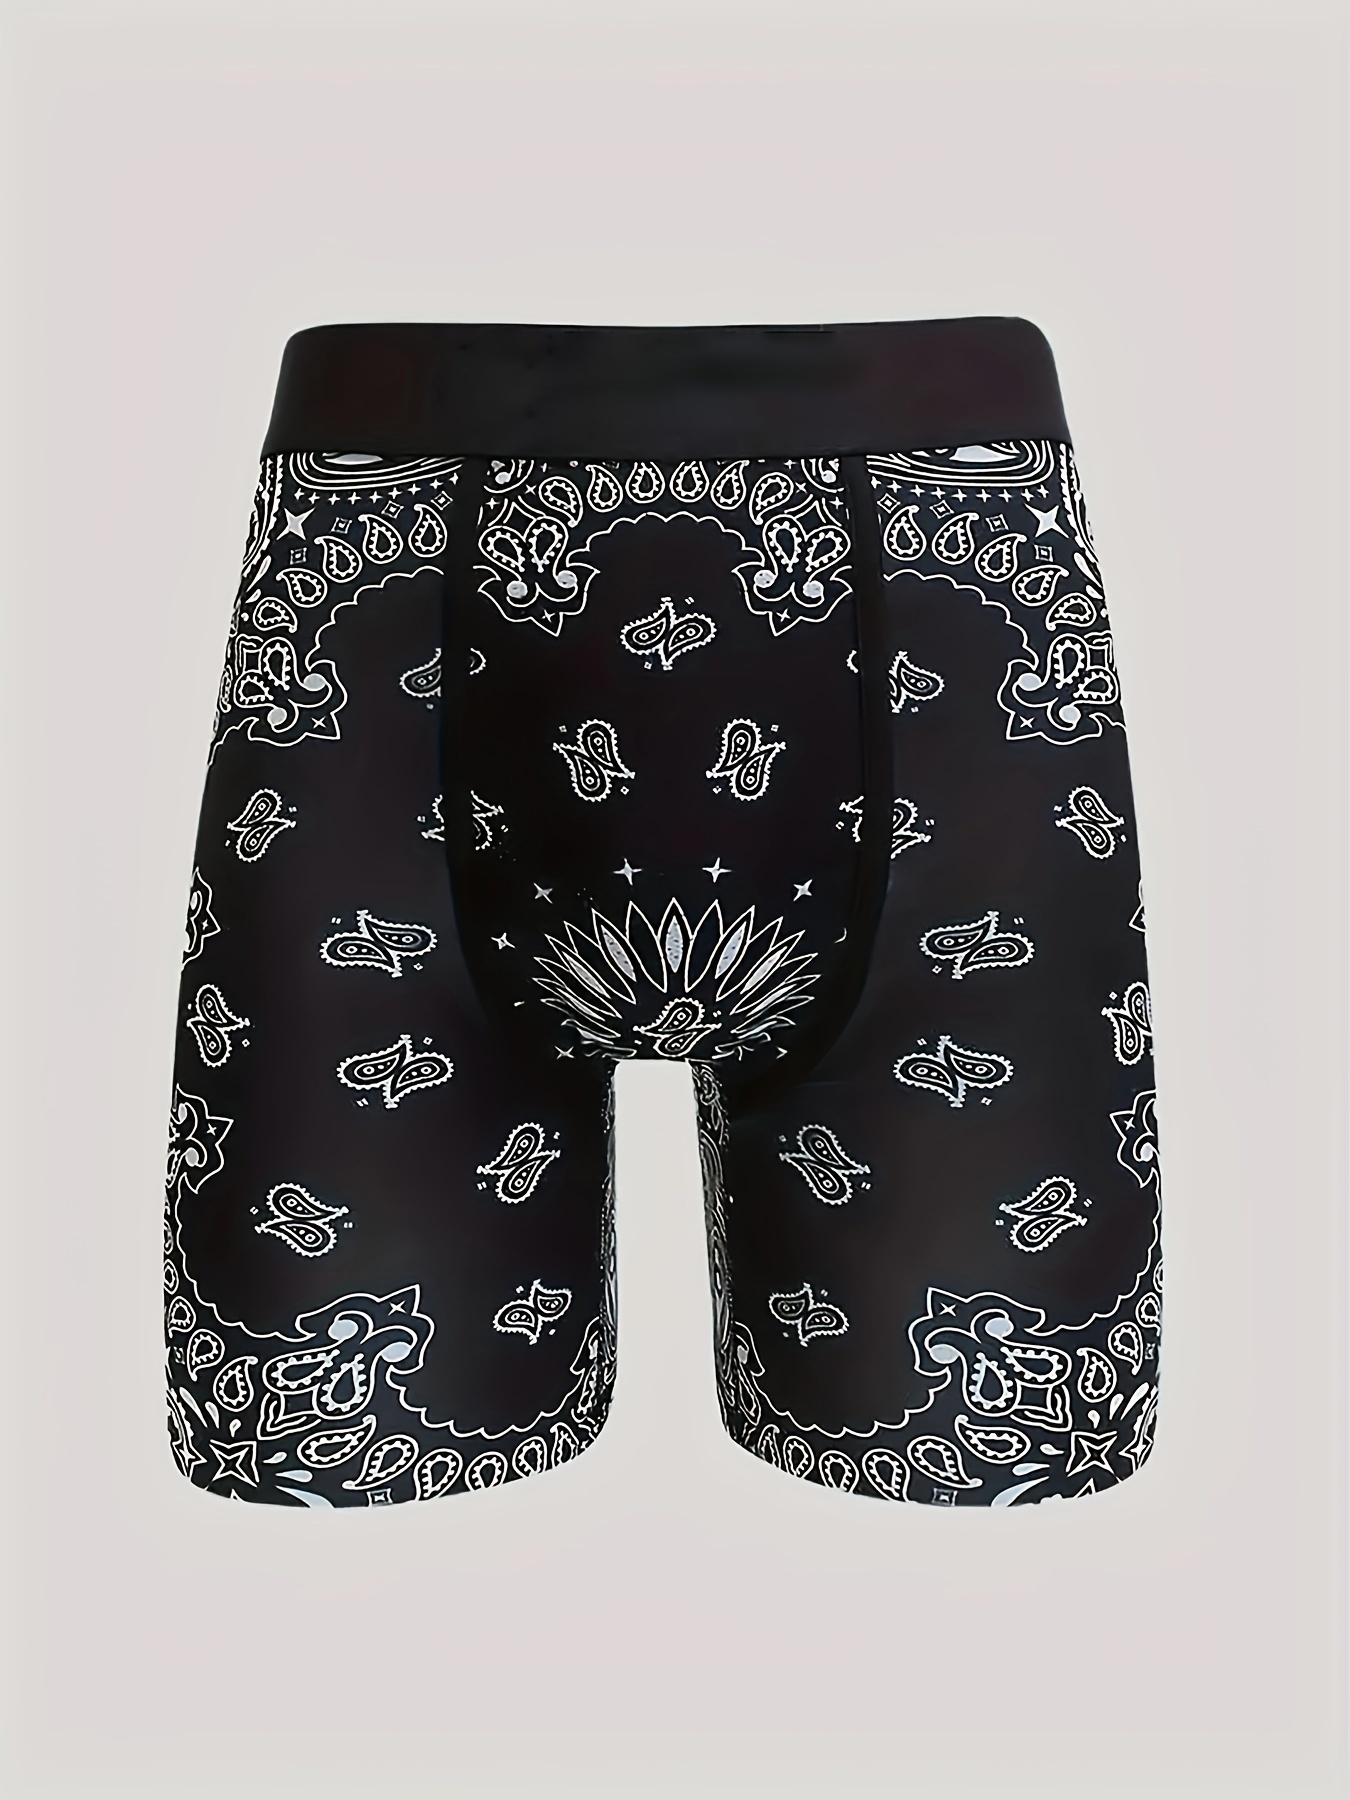 PSD x Ghost Face Big Boxer Briefs